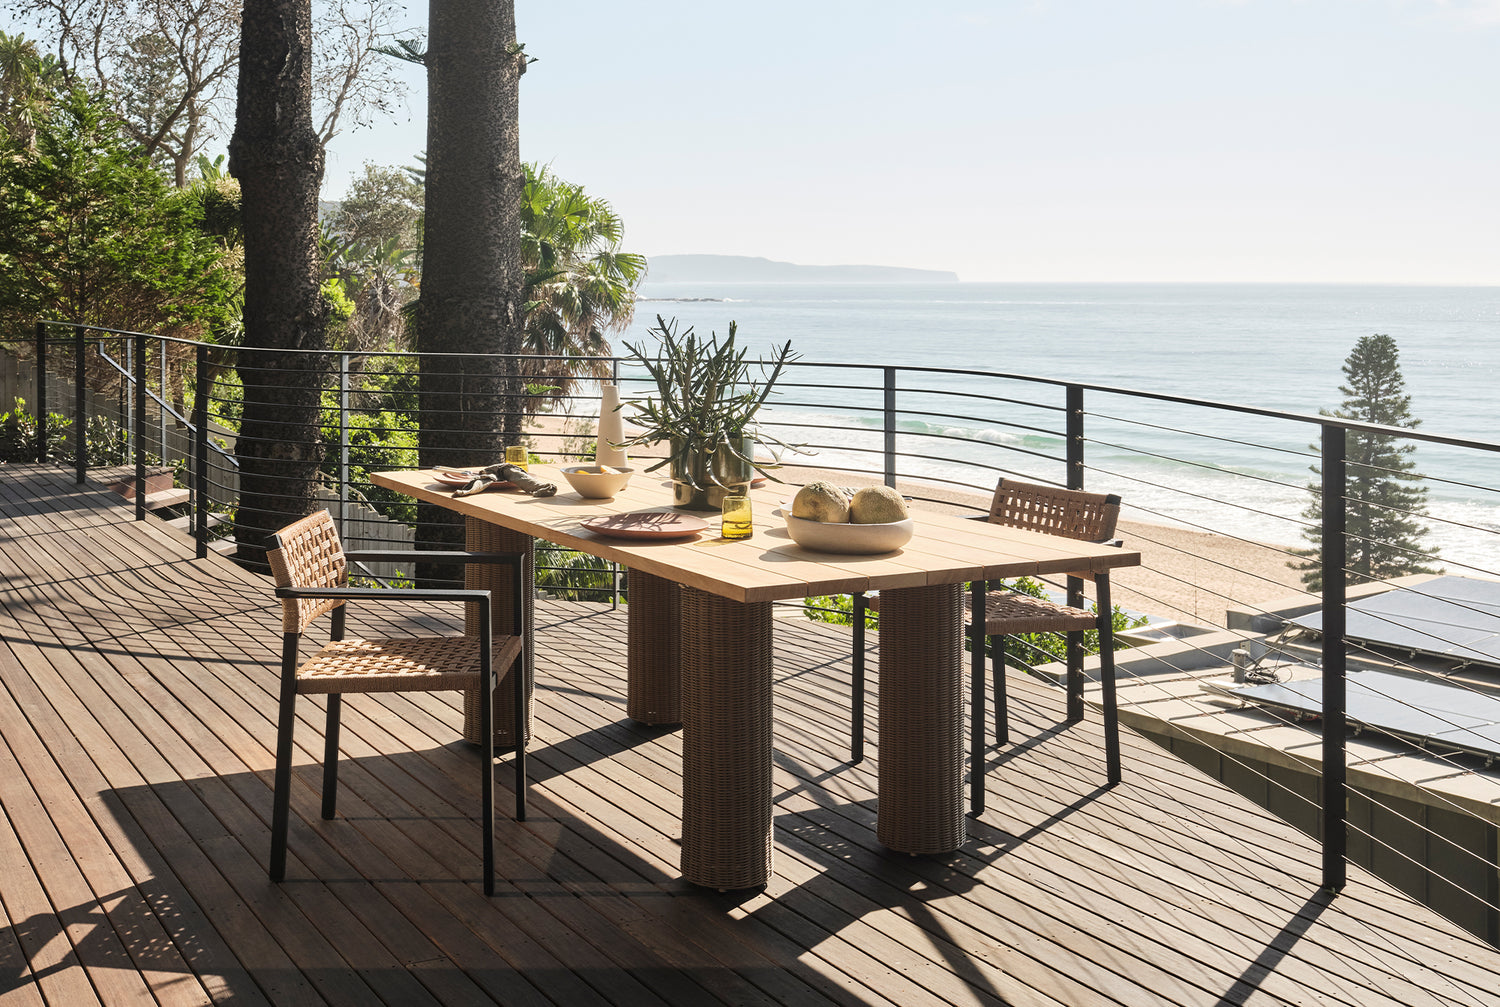 Outdoor Delphi Dining Chair